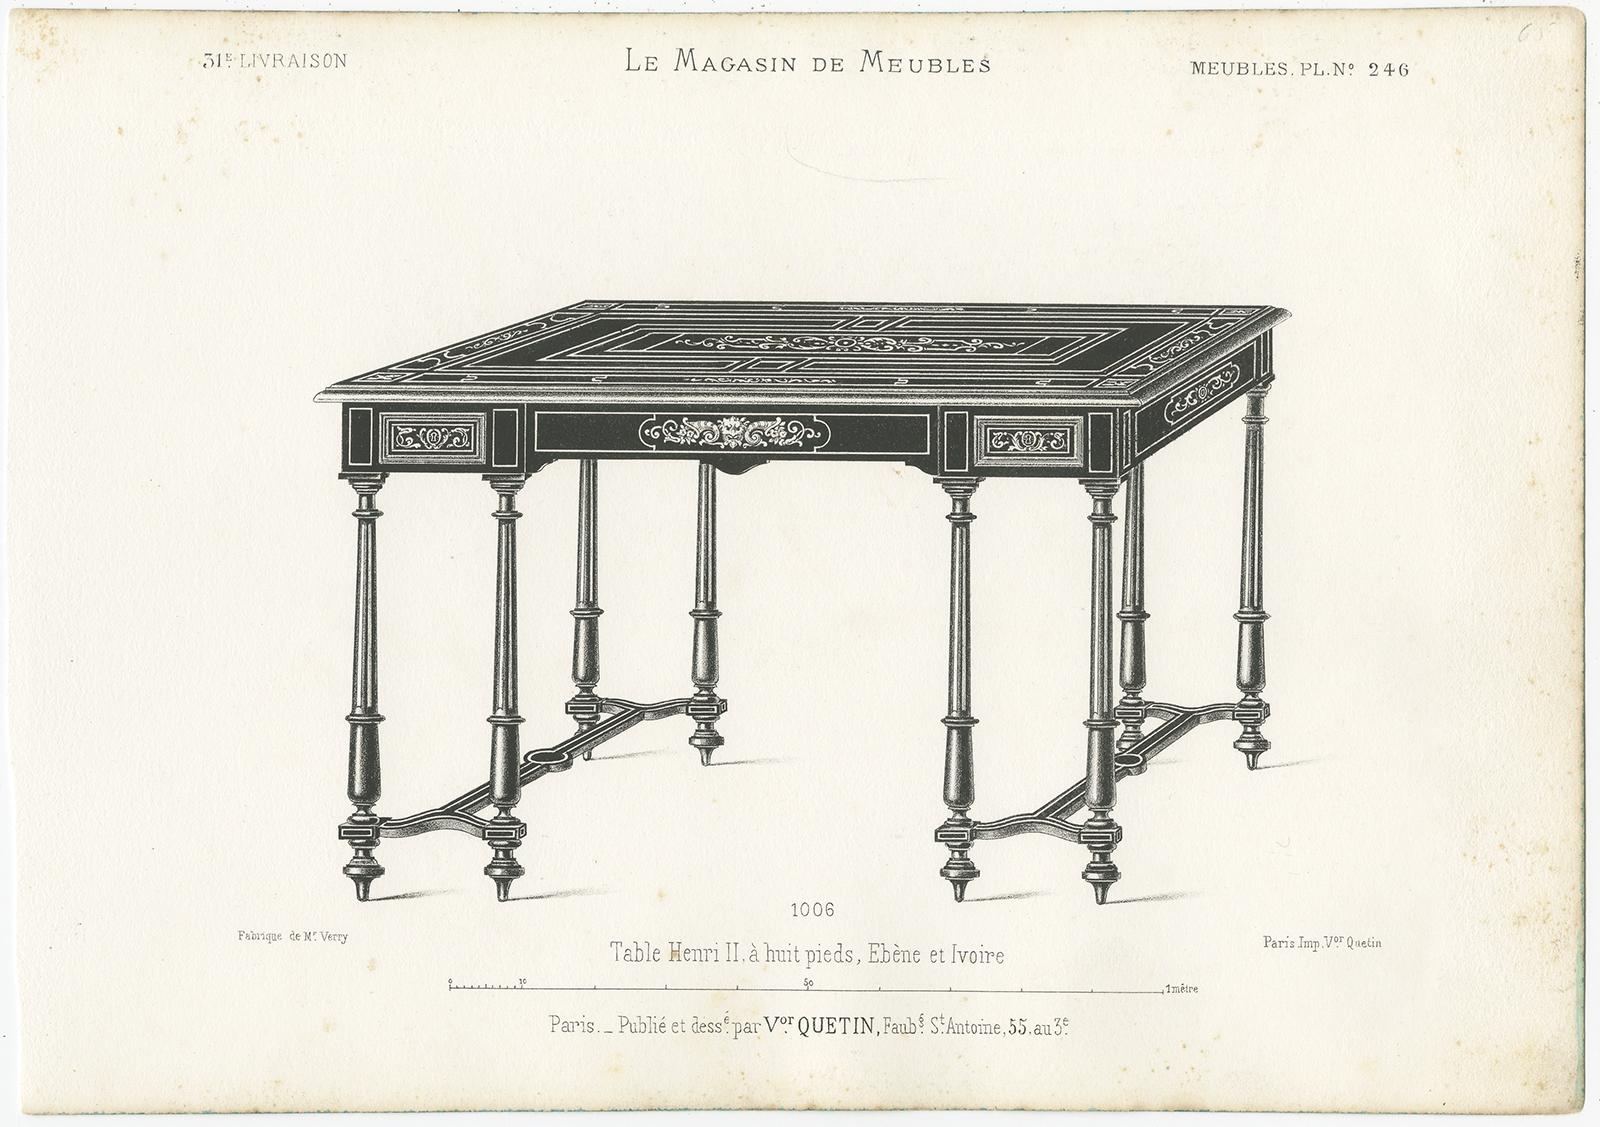 Set of three antique furniture prints depicting various tables. These prints originate from 'Le Magasin de Meubles' by Victor Quetion. Published in Paris, circa 1860.